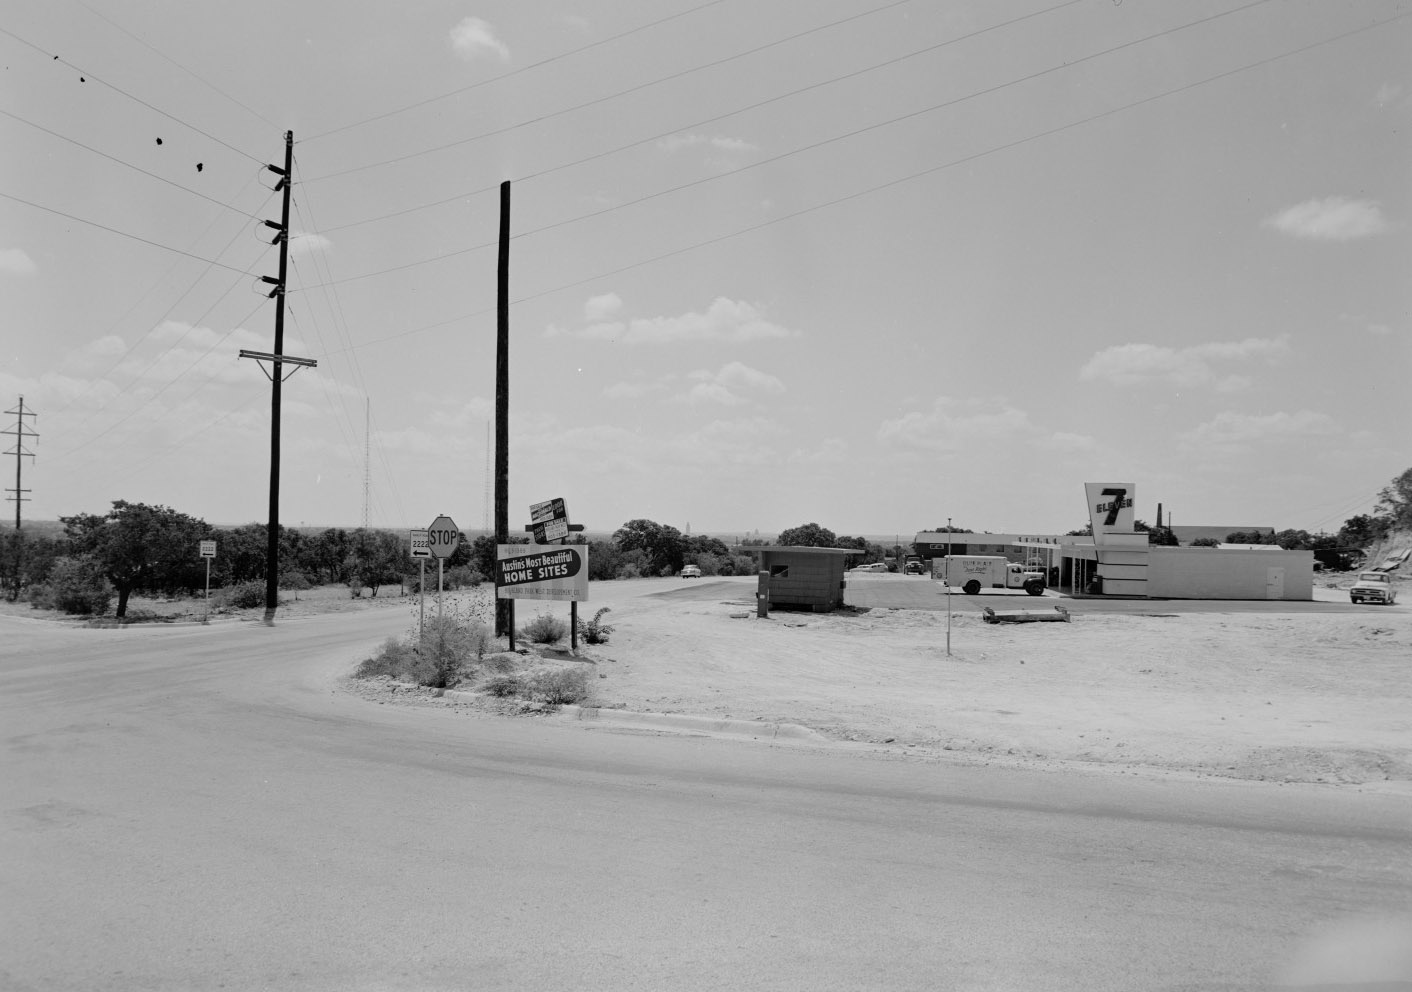 Ranch Road 2222 en Route to Home Sites, Features Early 7-Eleven, 1957